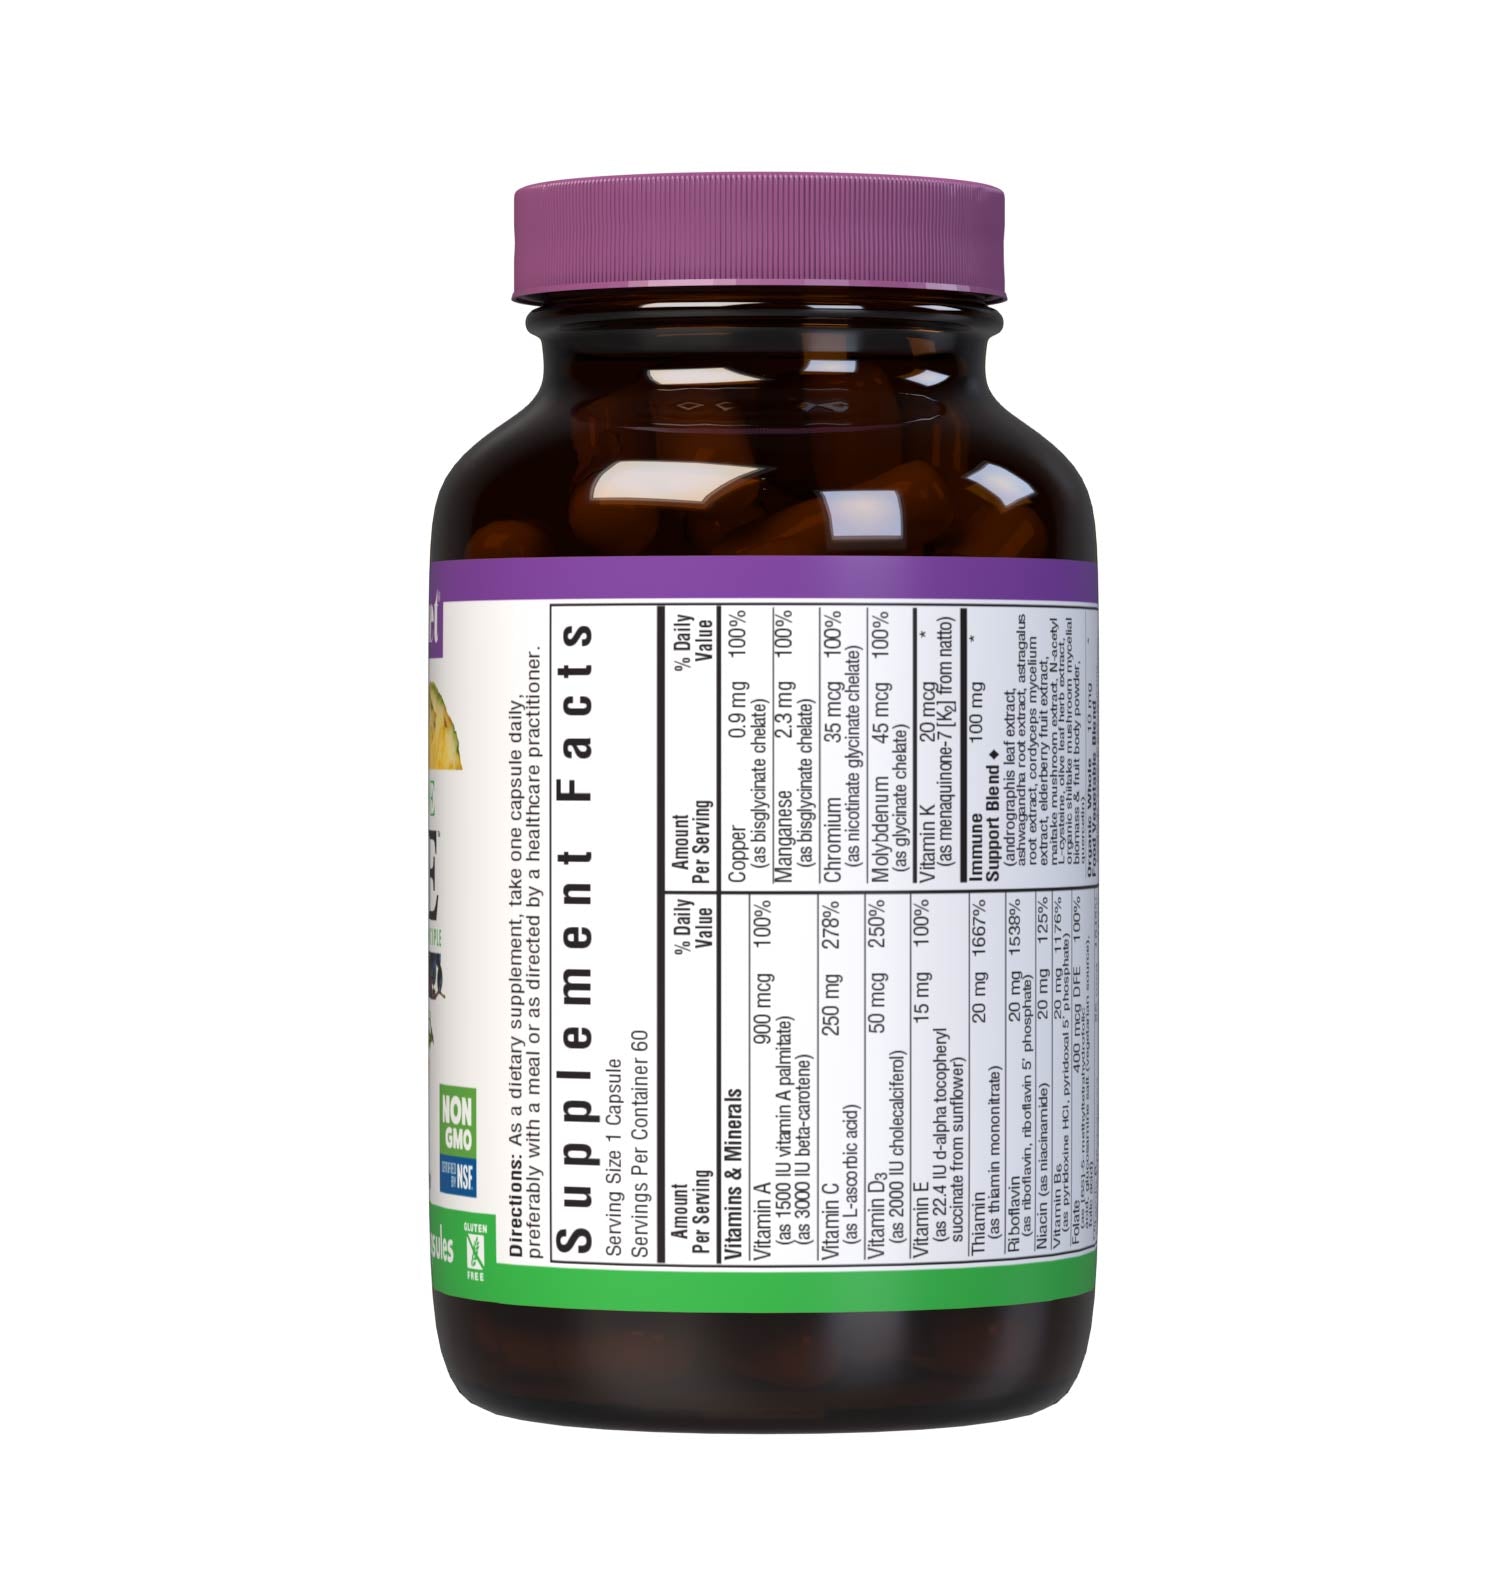 Bluebonnet Nutrition's Immune One 60 vegetable capsules delivers targeted nutrients for respiratory support, sinus comfort, immune defense and antioxidant protection including: Vitamin E derived from Non-GMO sunflower oil Active coenzyme forms of B vitamins. Supplement facts panel. #size_60 count